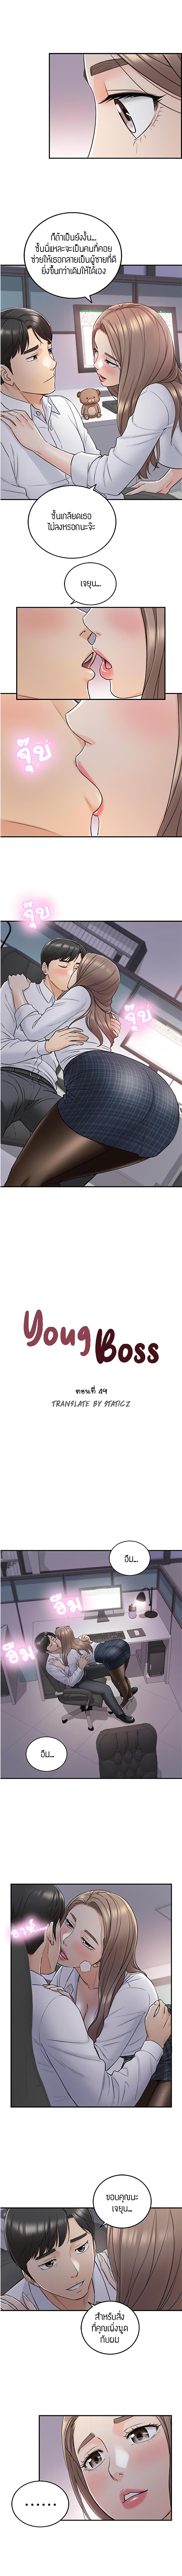 Young Boss 49-49